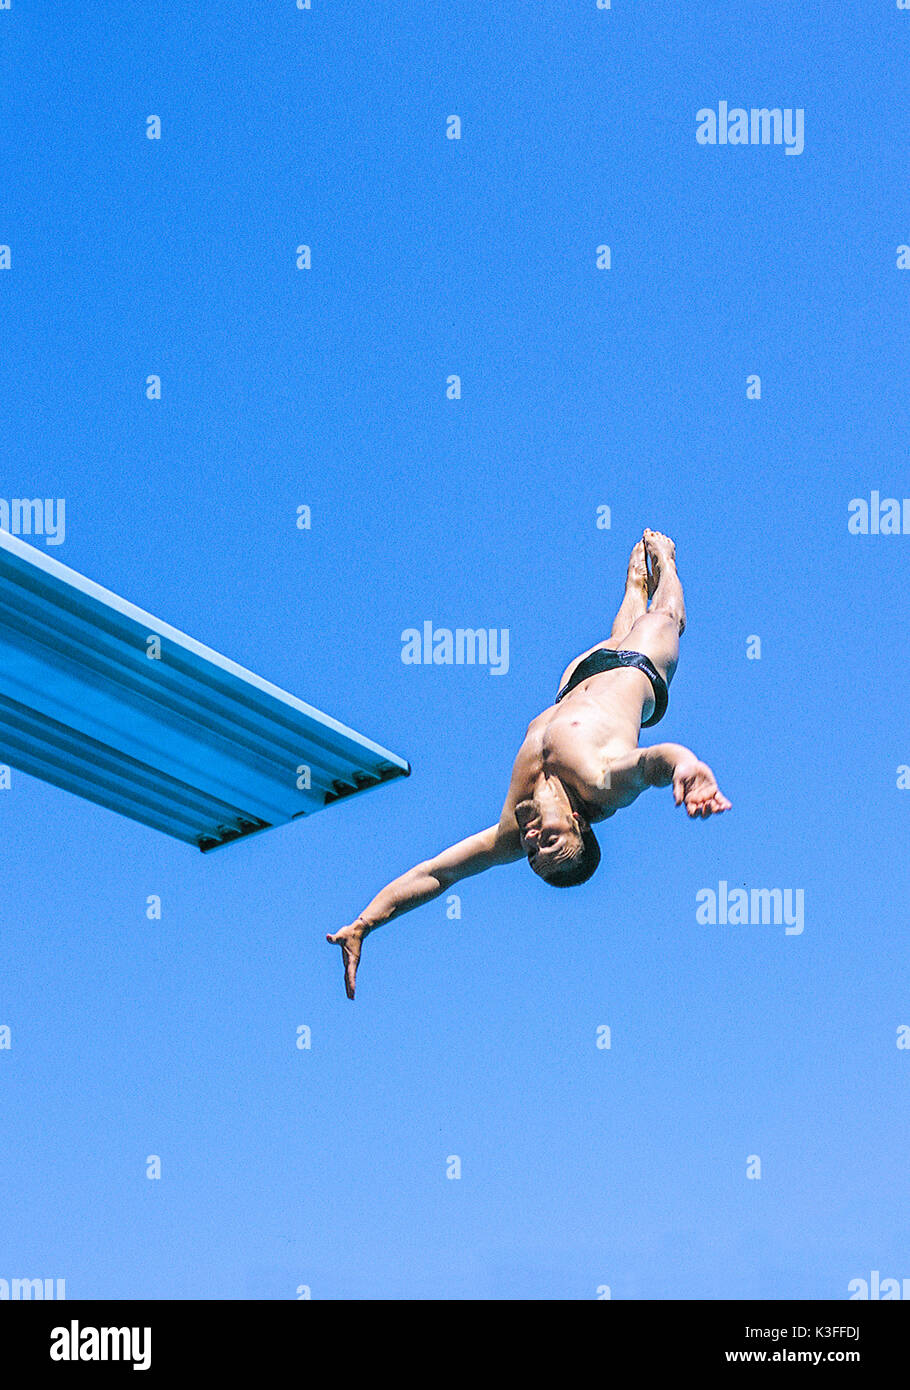 Tower jumper jumping of the springboard Stock Photo